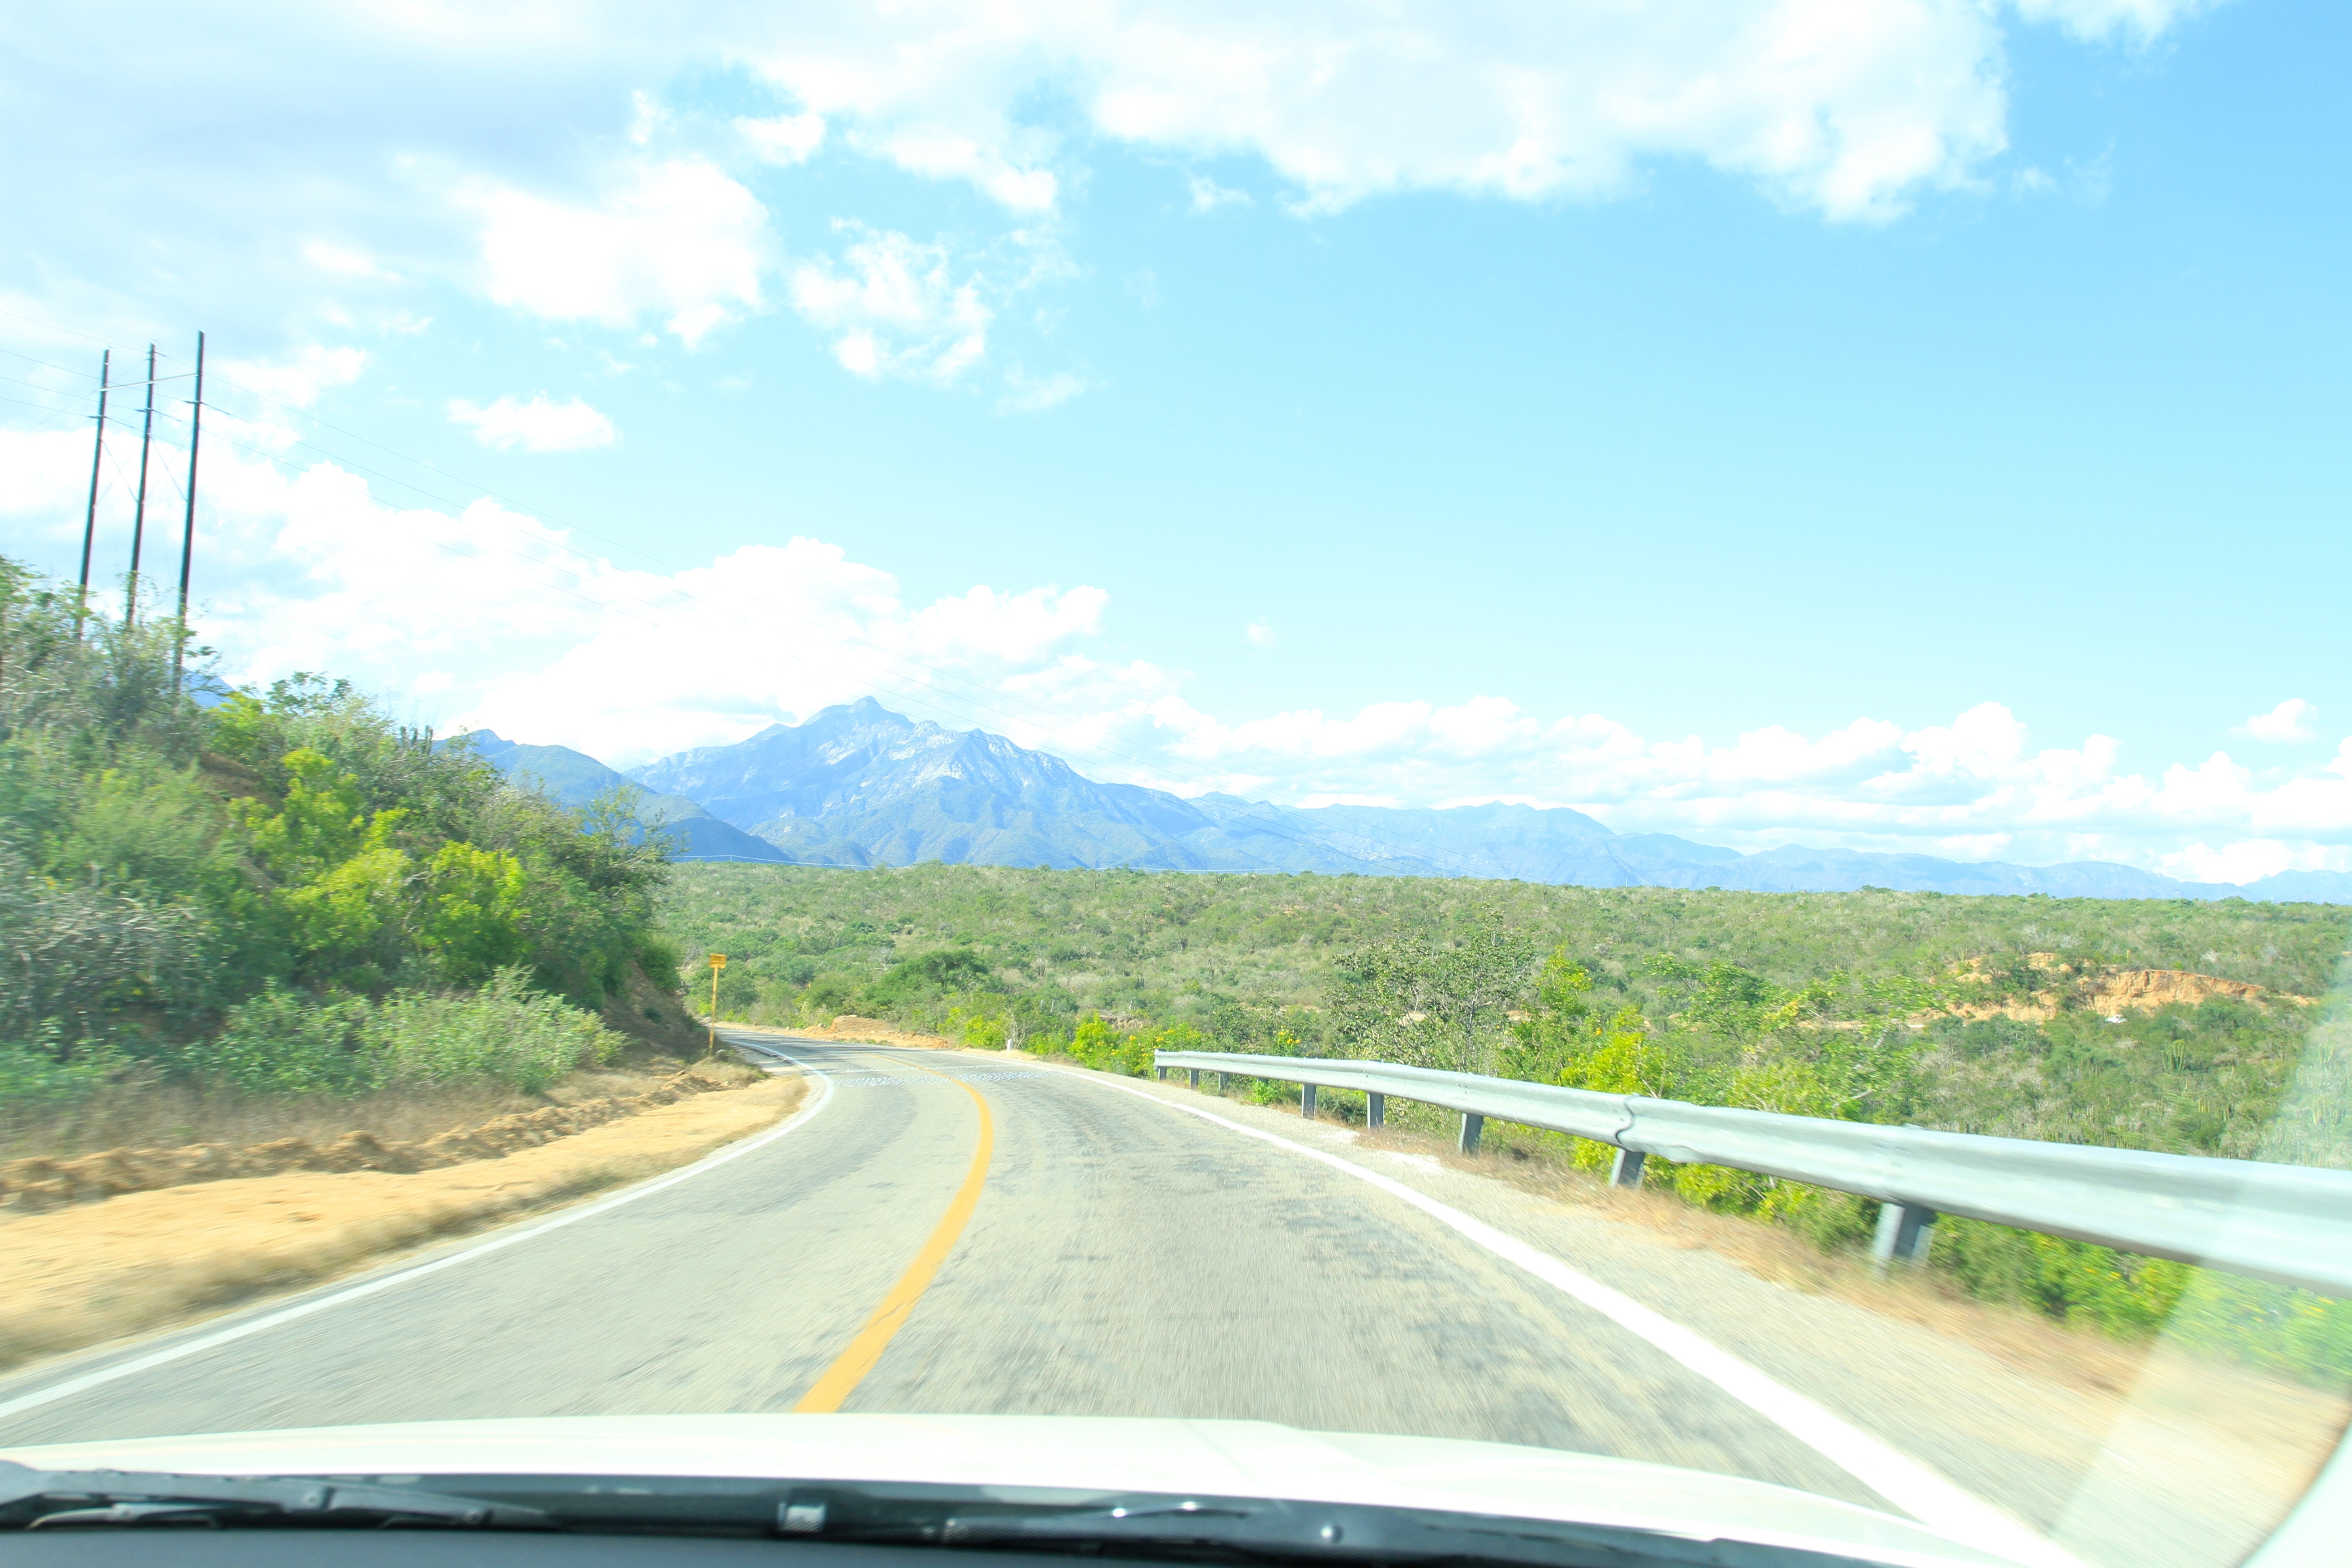 A view from the cockpit on the way to La Ventana